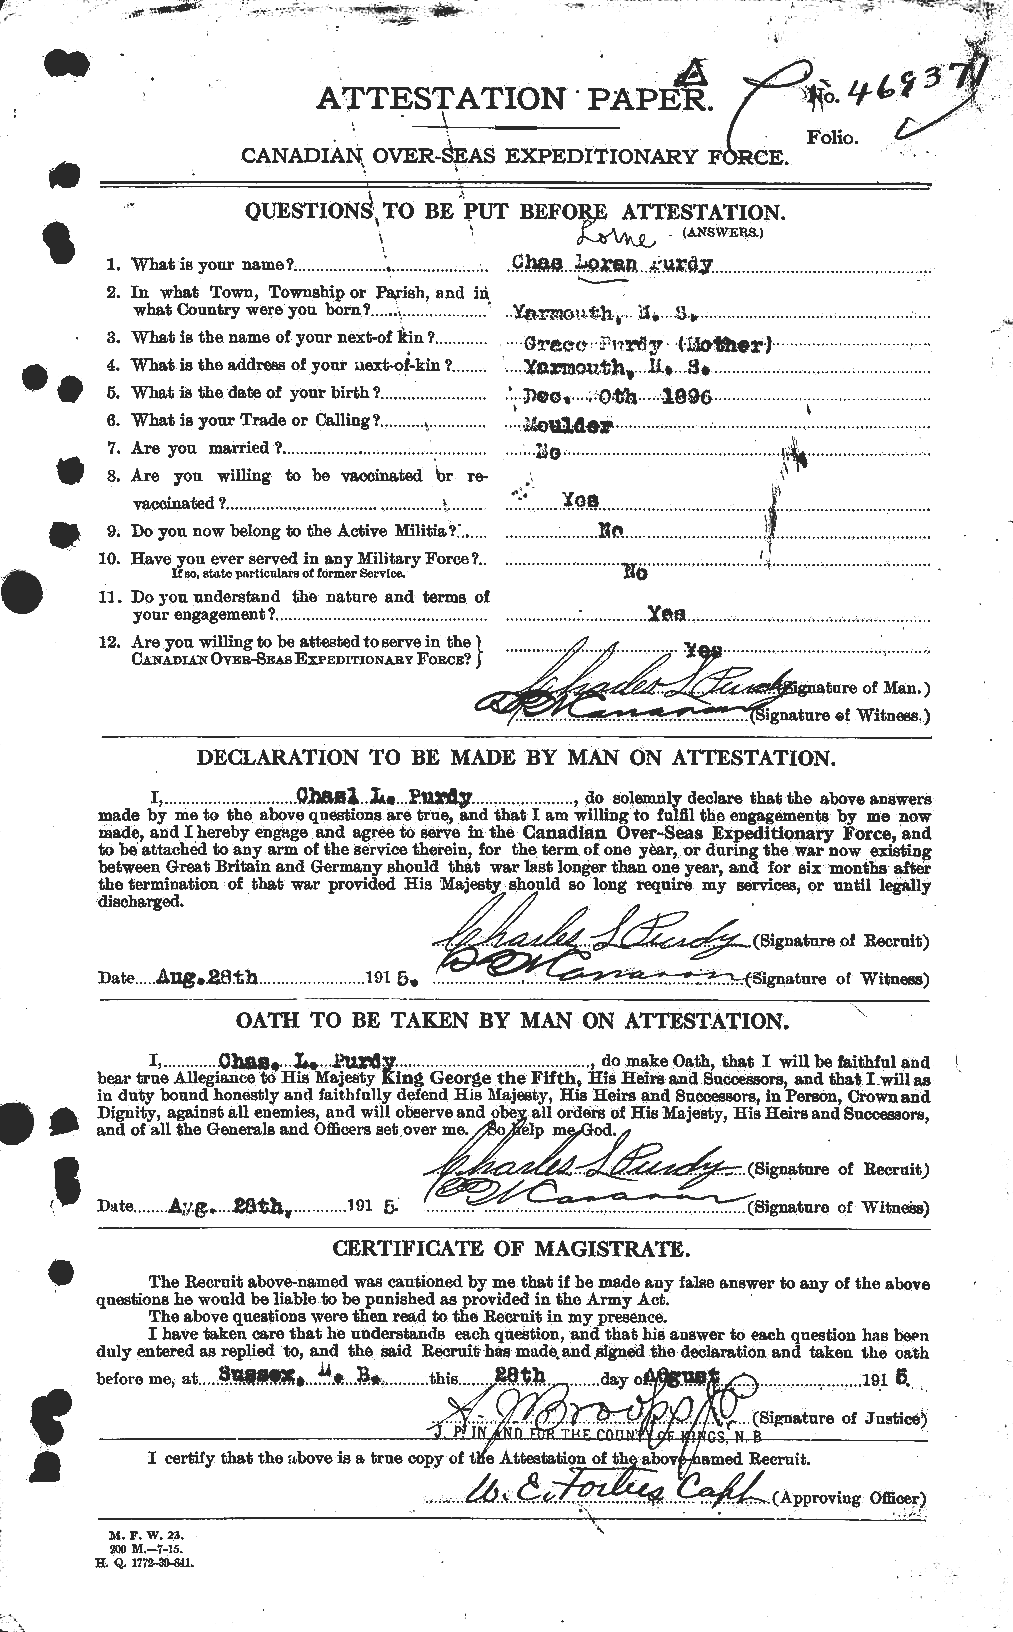 Personnel Records of the First World War - CEF 592284a